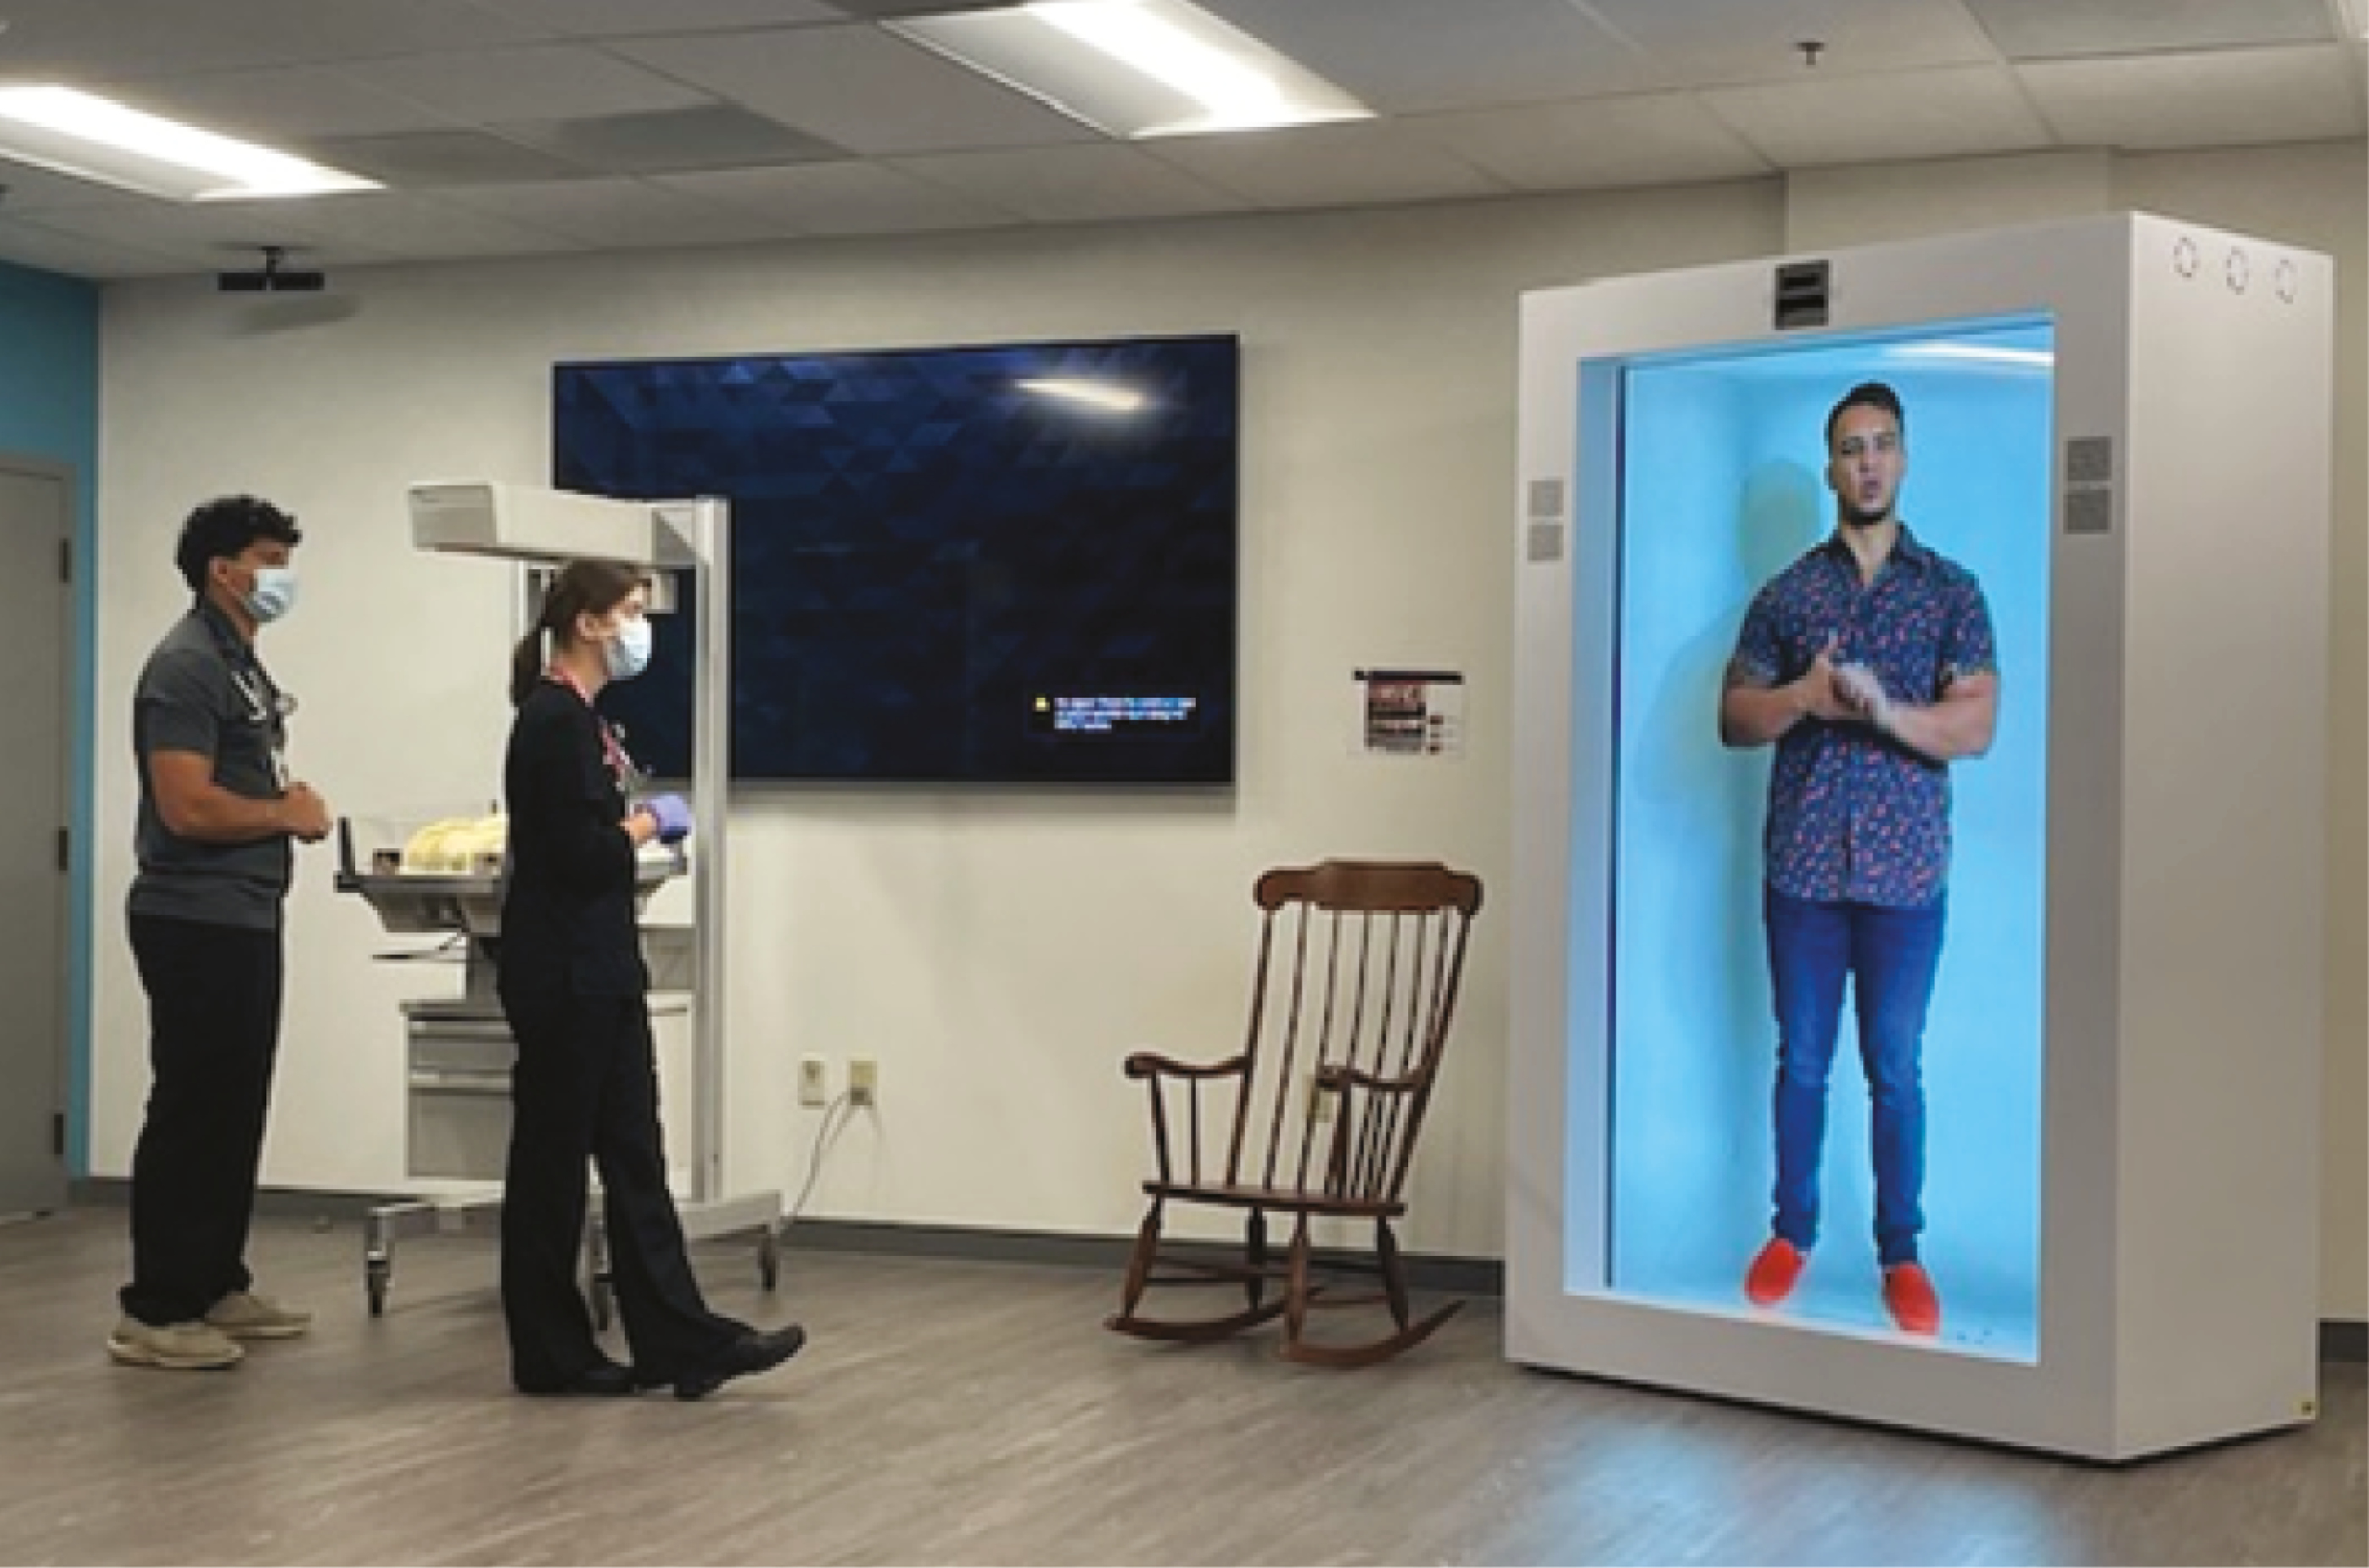 Participants interacting with the hologram.